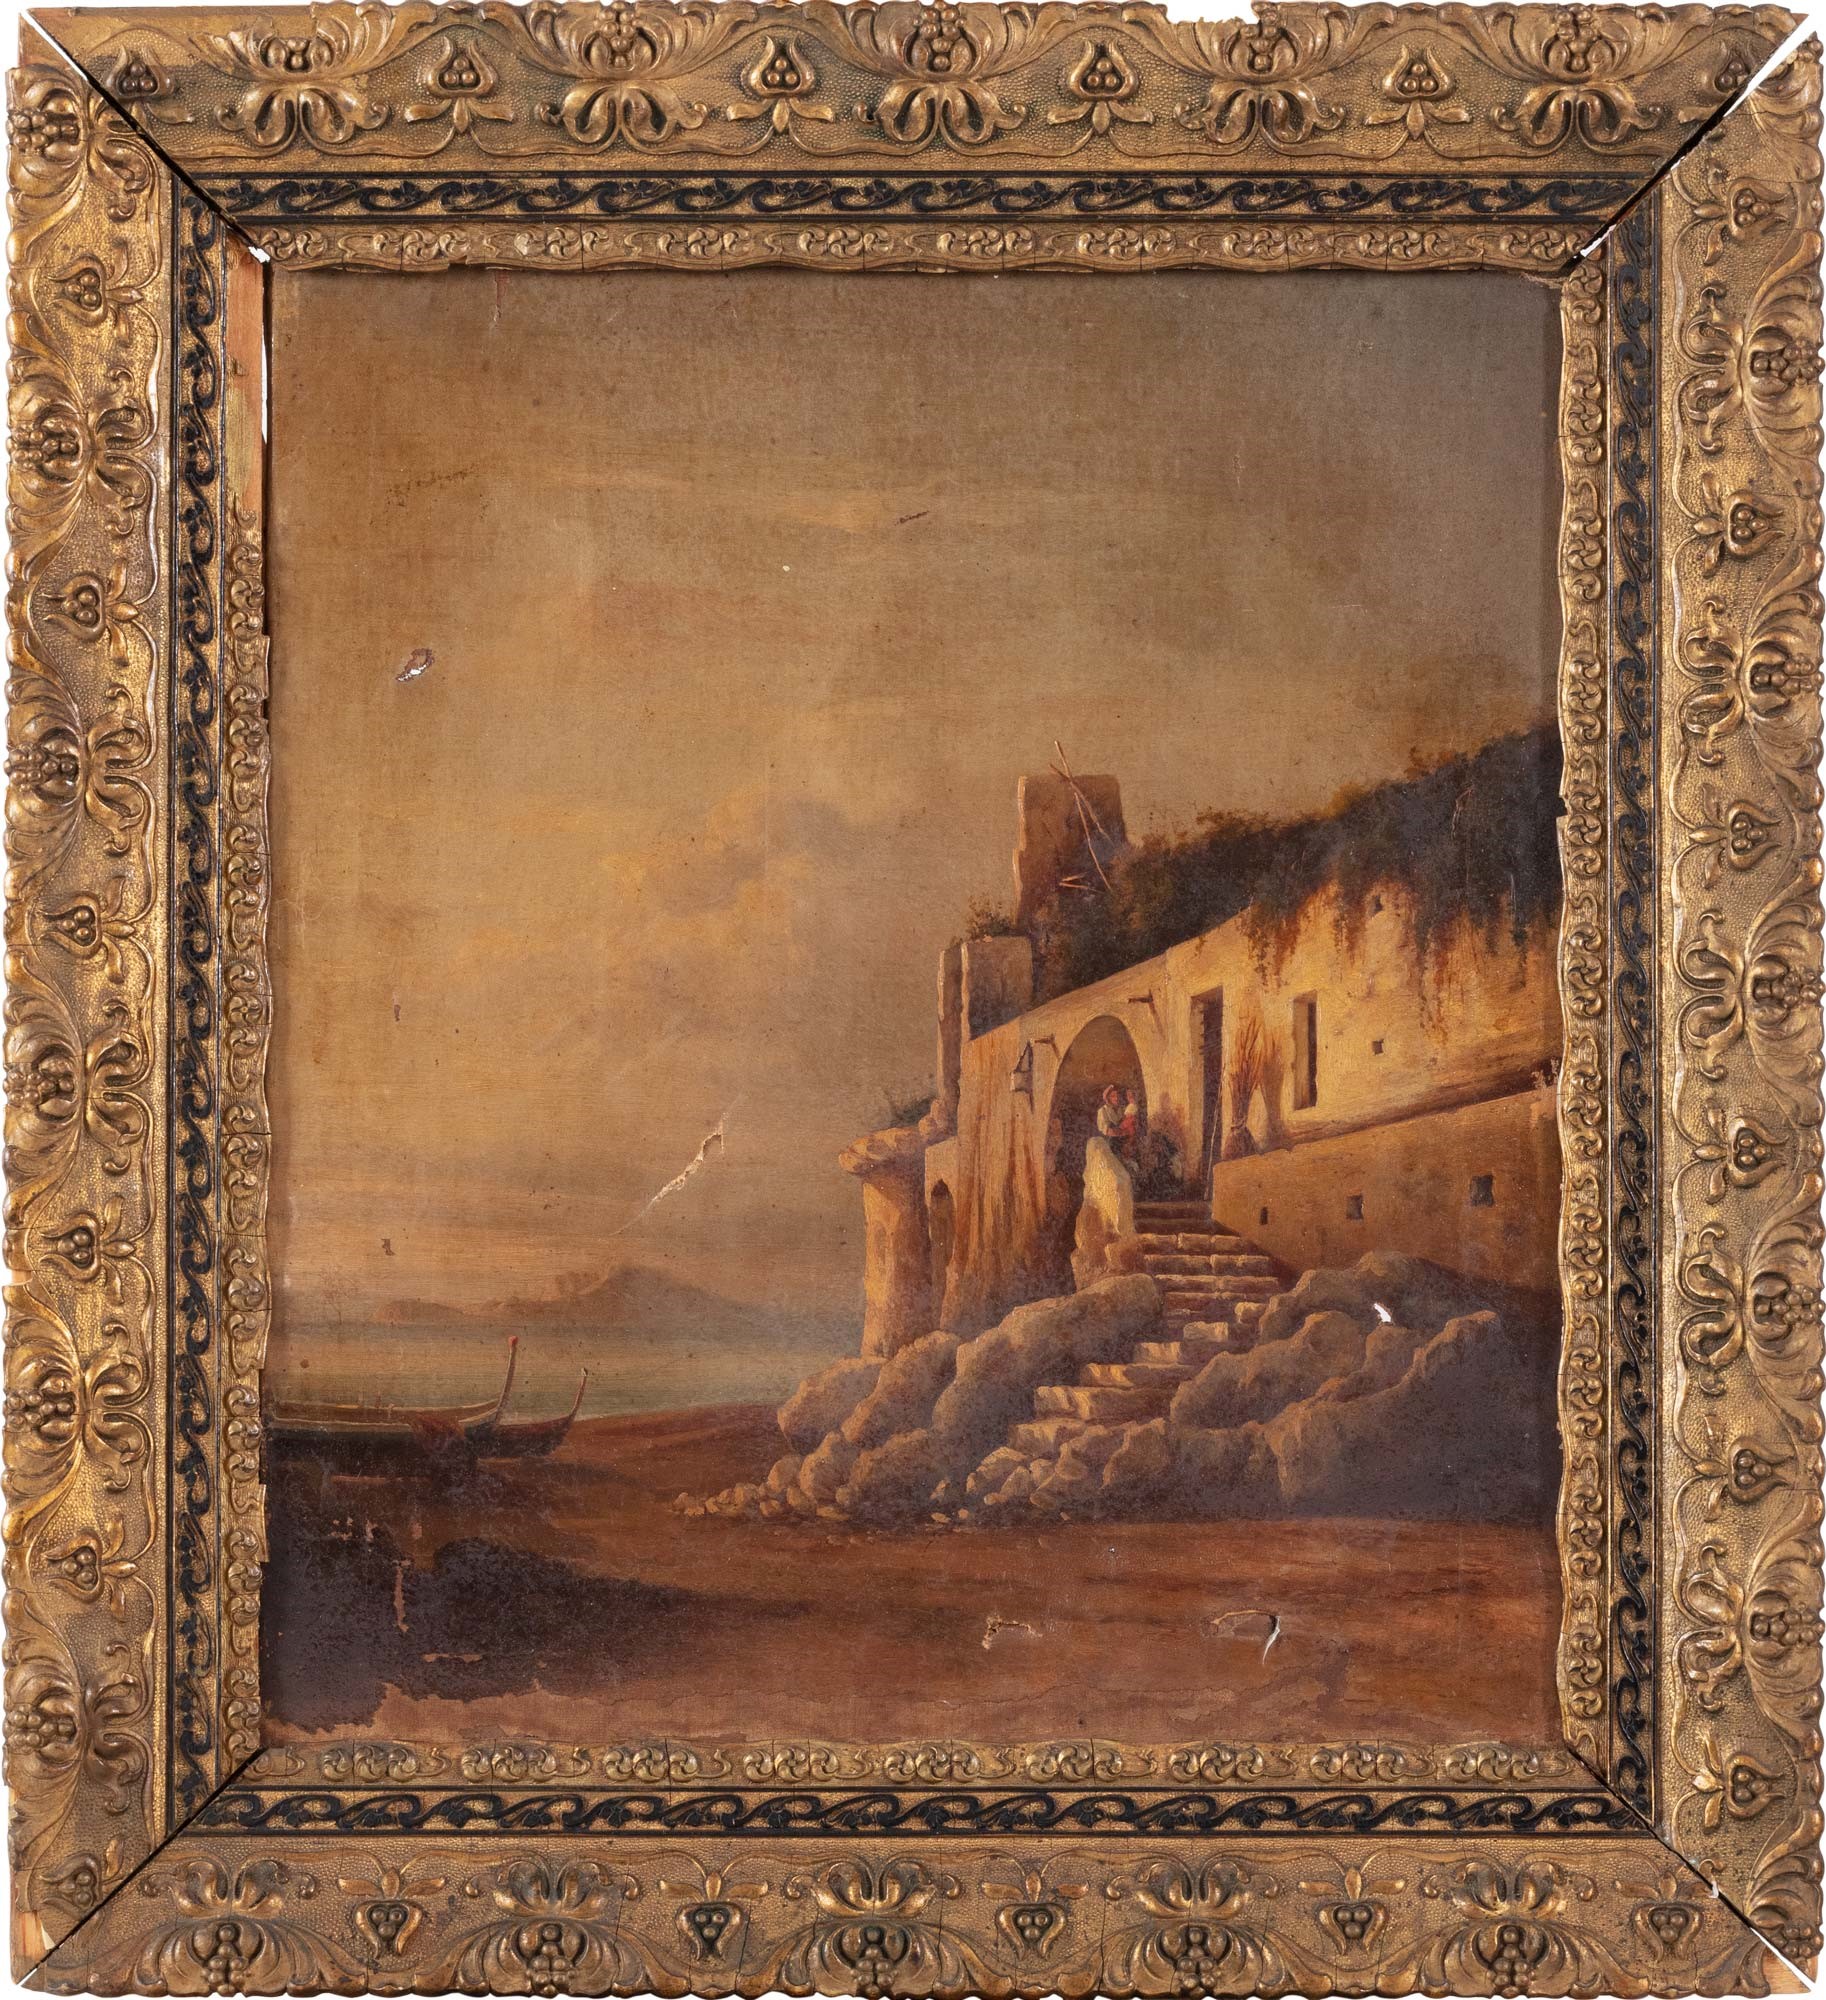 View of the coast with figures late 19th century, oil painting on canvasdrops of color, small